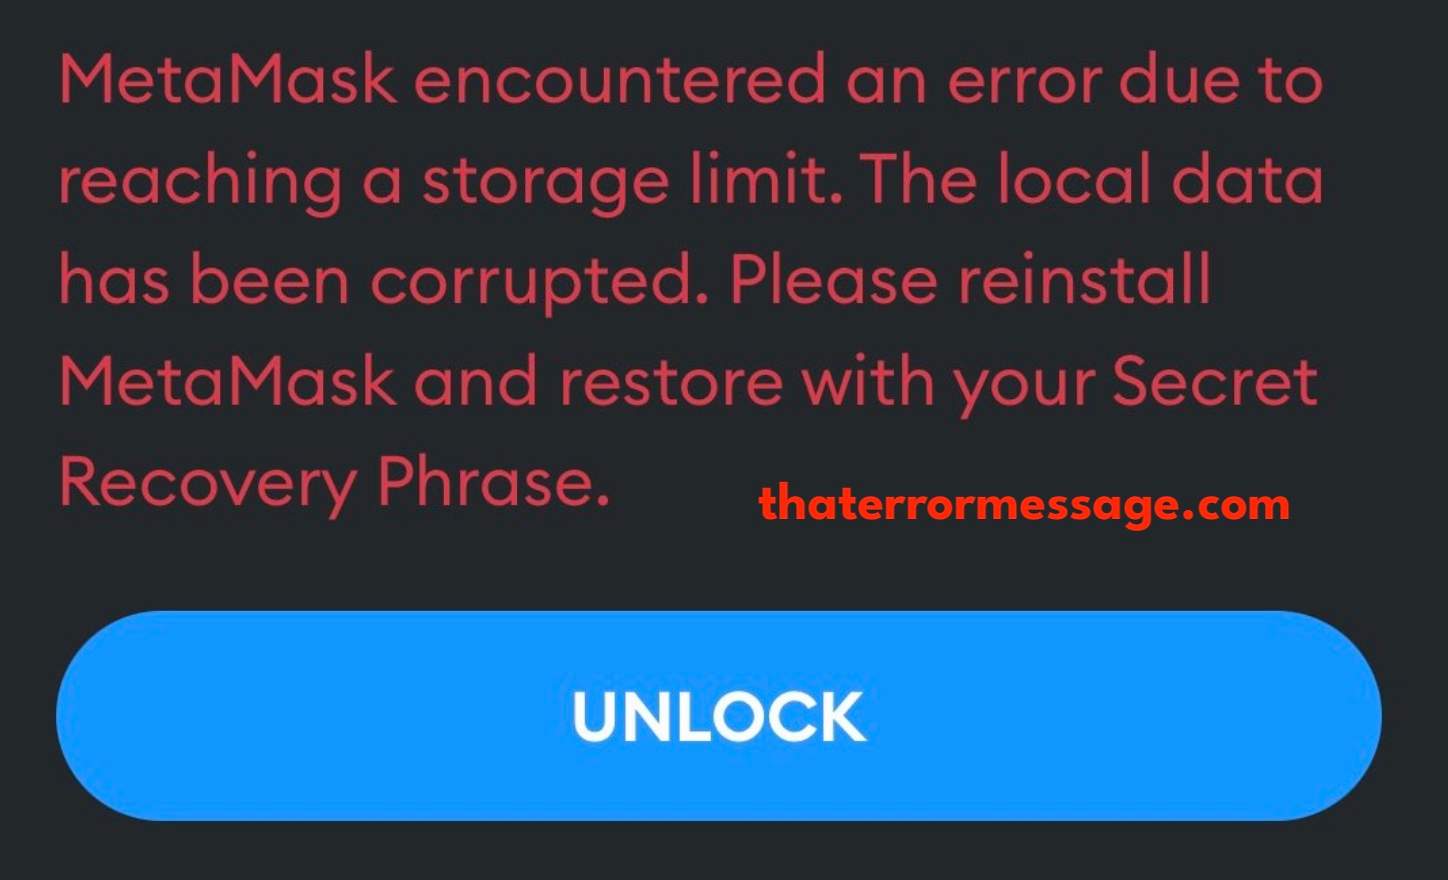 Metamask Encountered An Error Due To Reaching A Storage Limit